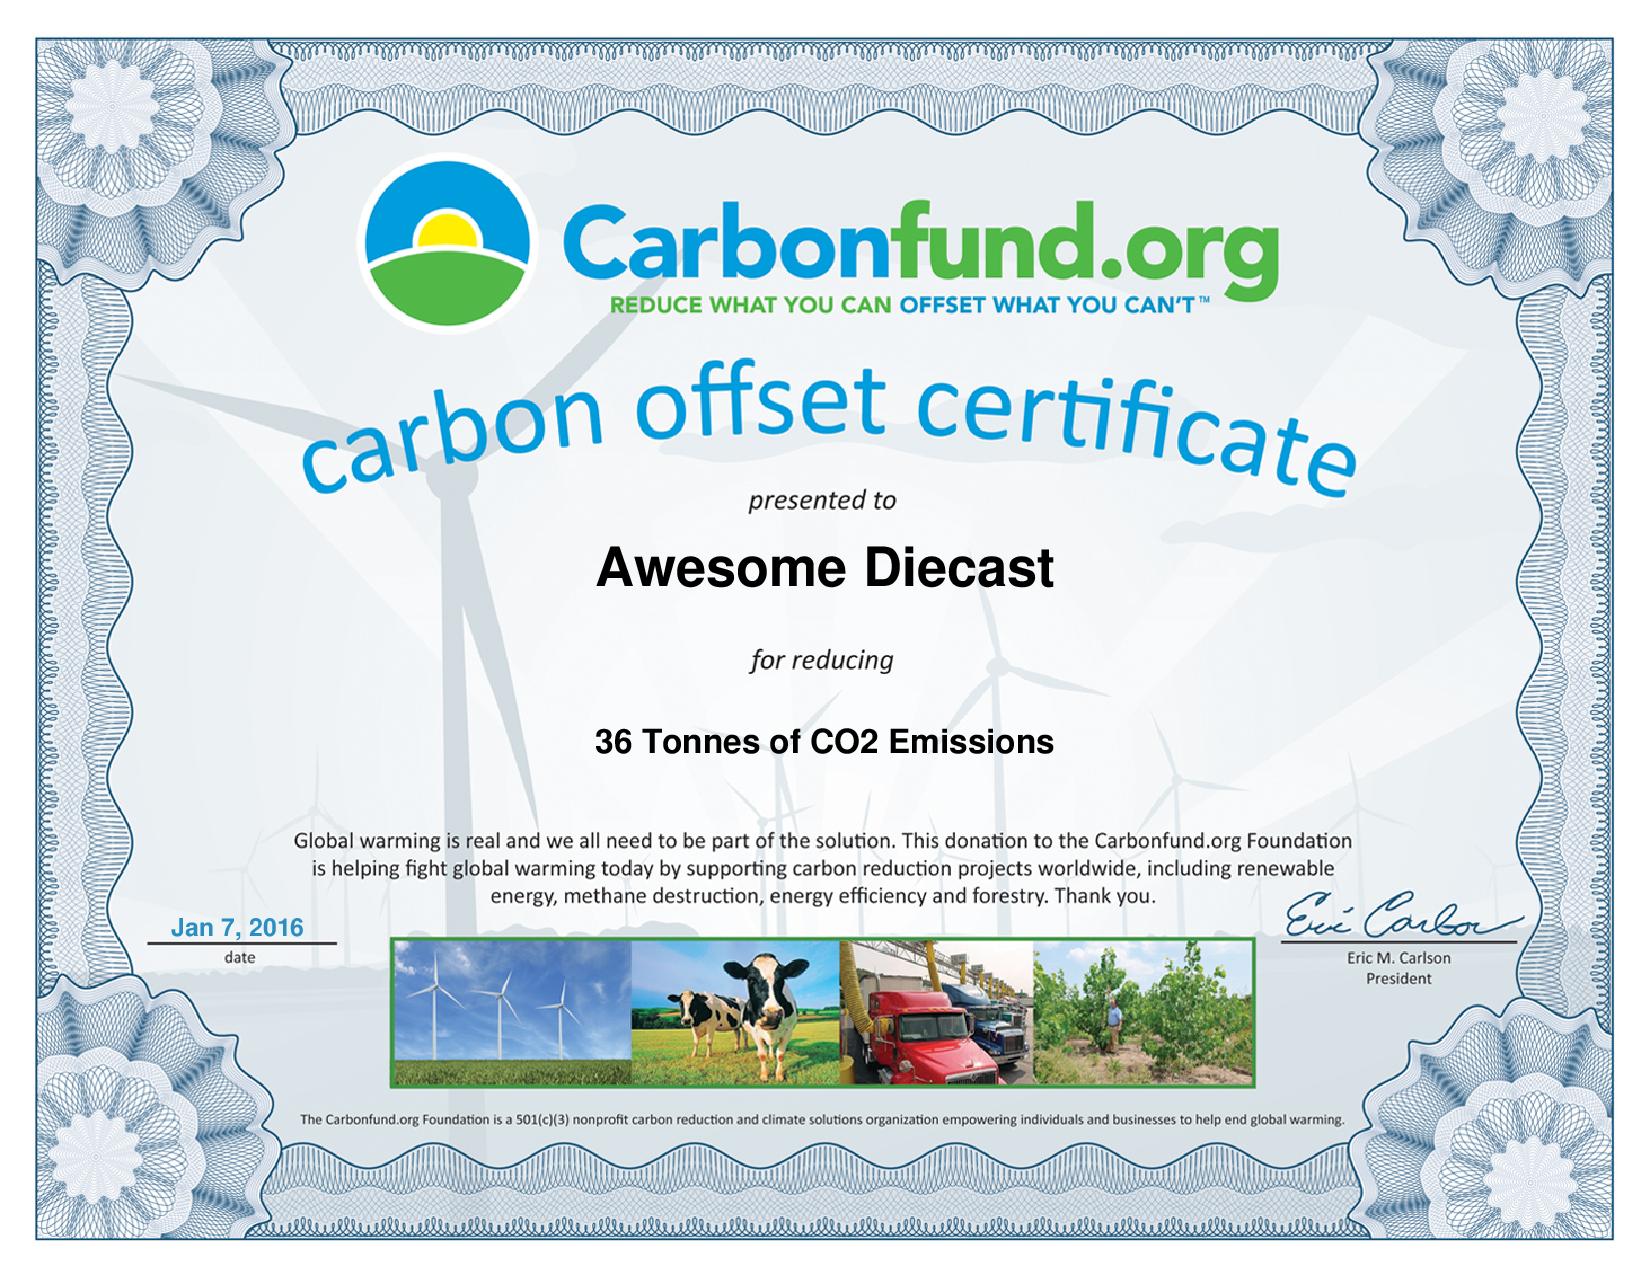 who issues carbon credits